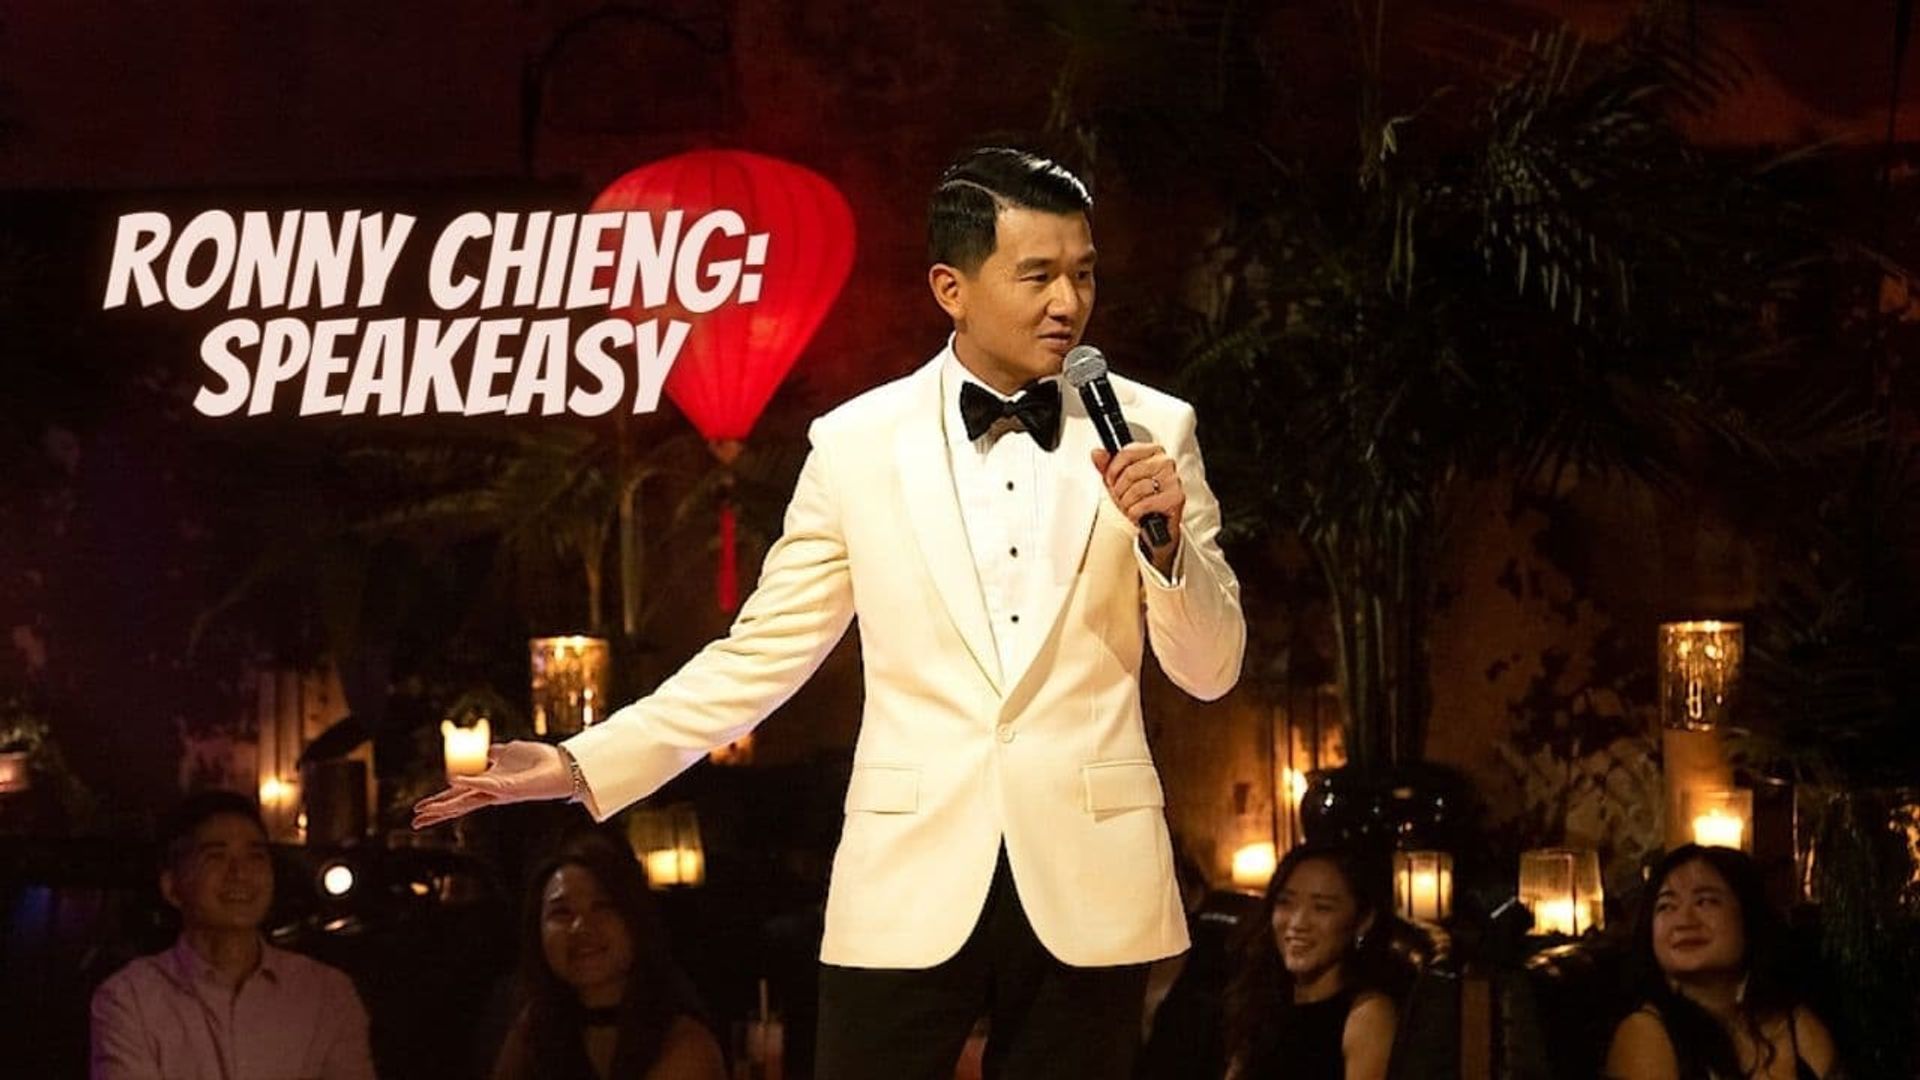 Ronny Chieng: Speakeasy background